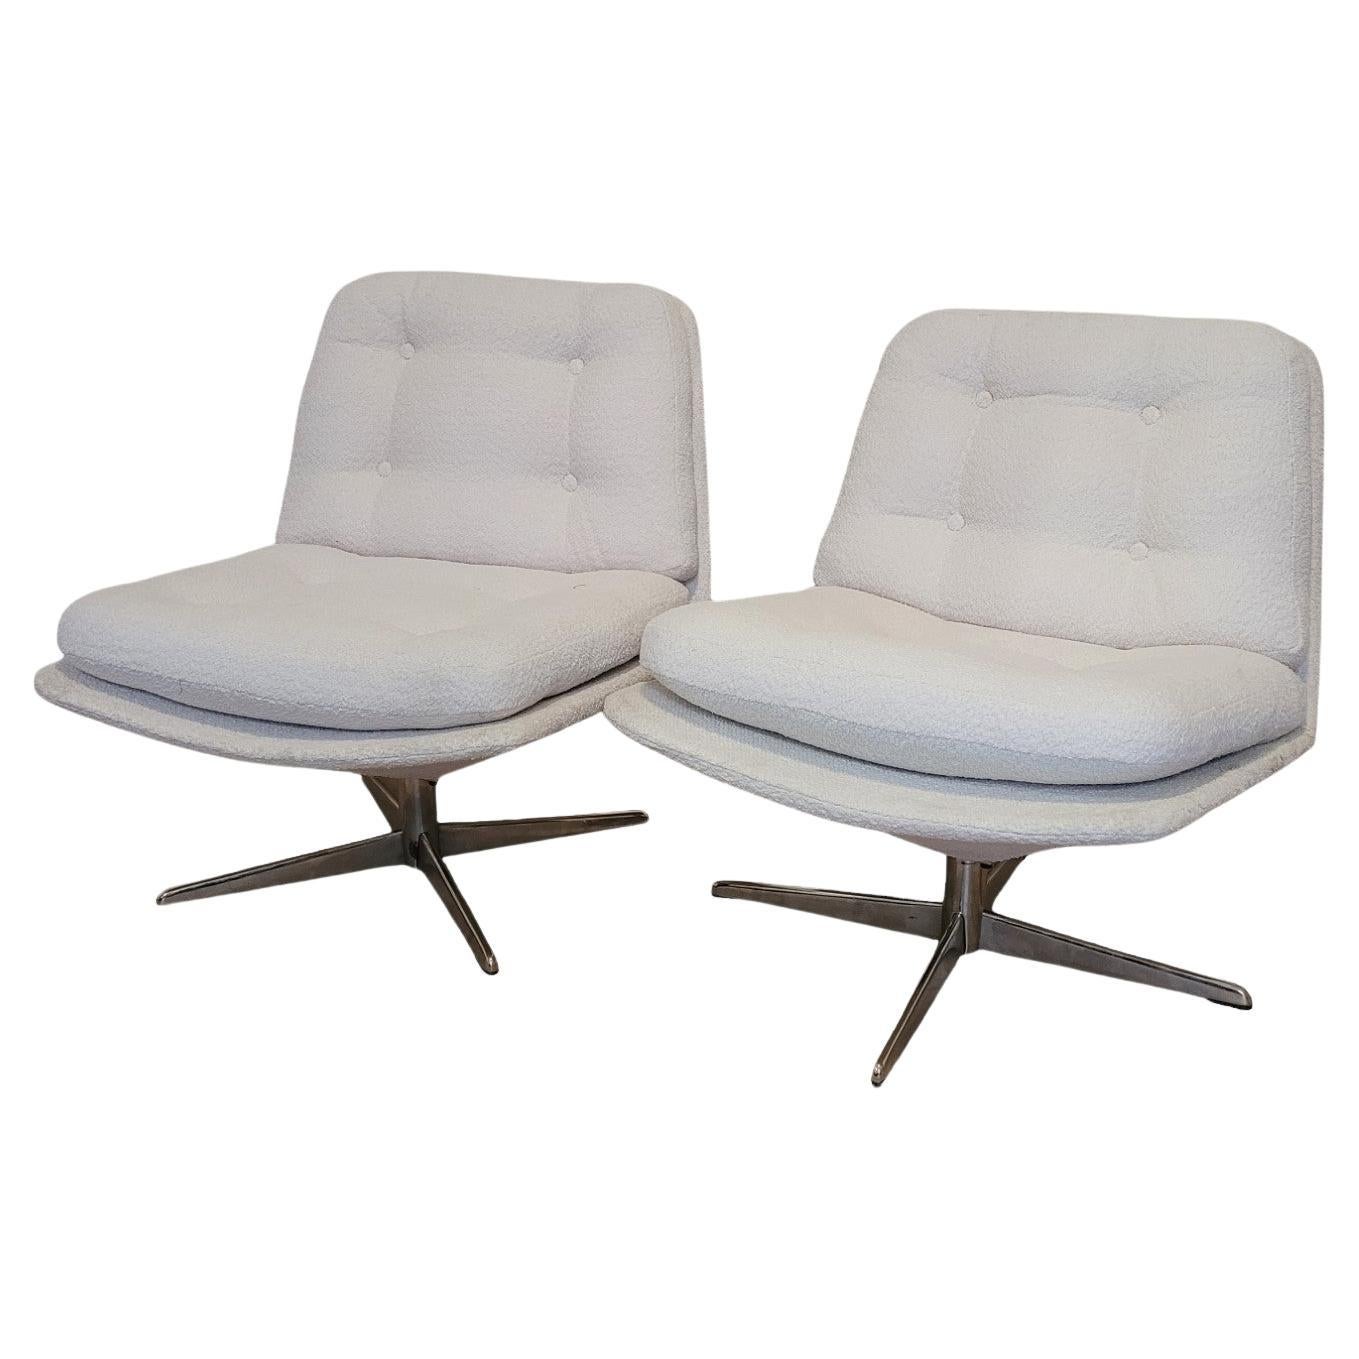 Pair Of Rotating Low Chairs, Bouclette Fabric, 20th Century For Sale